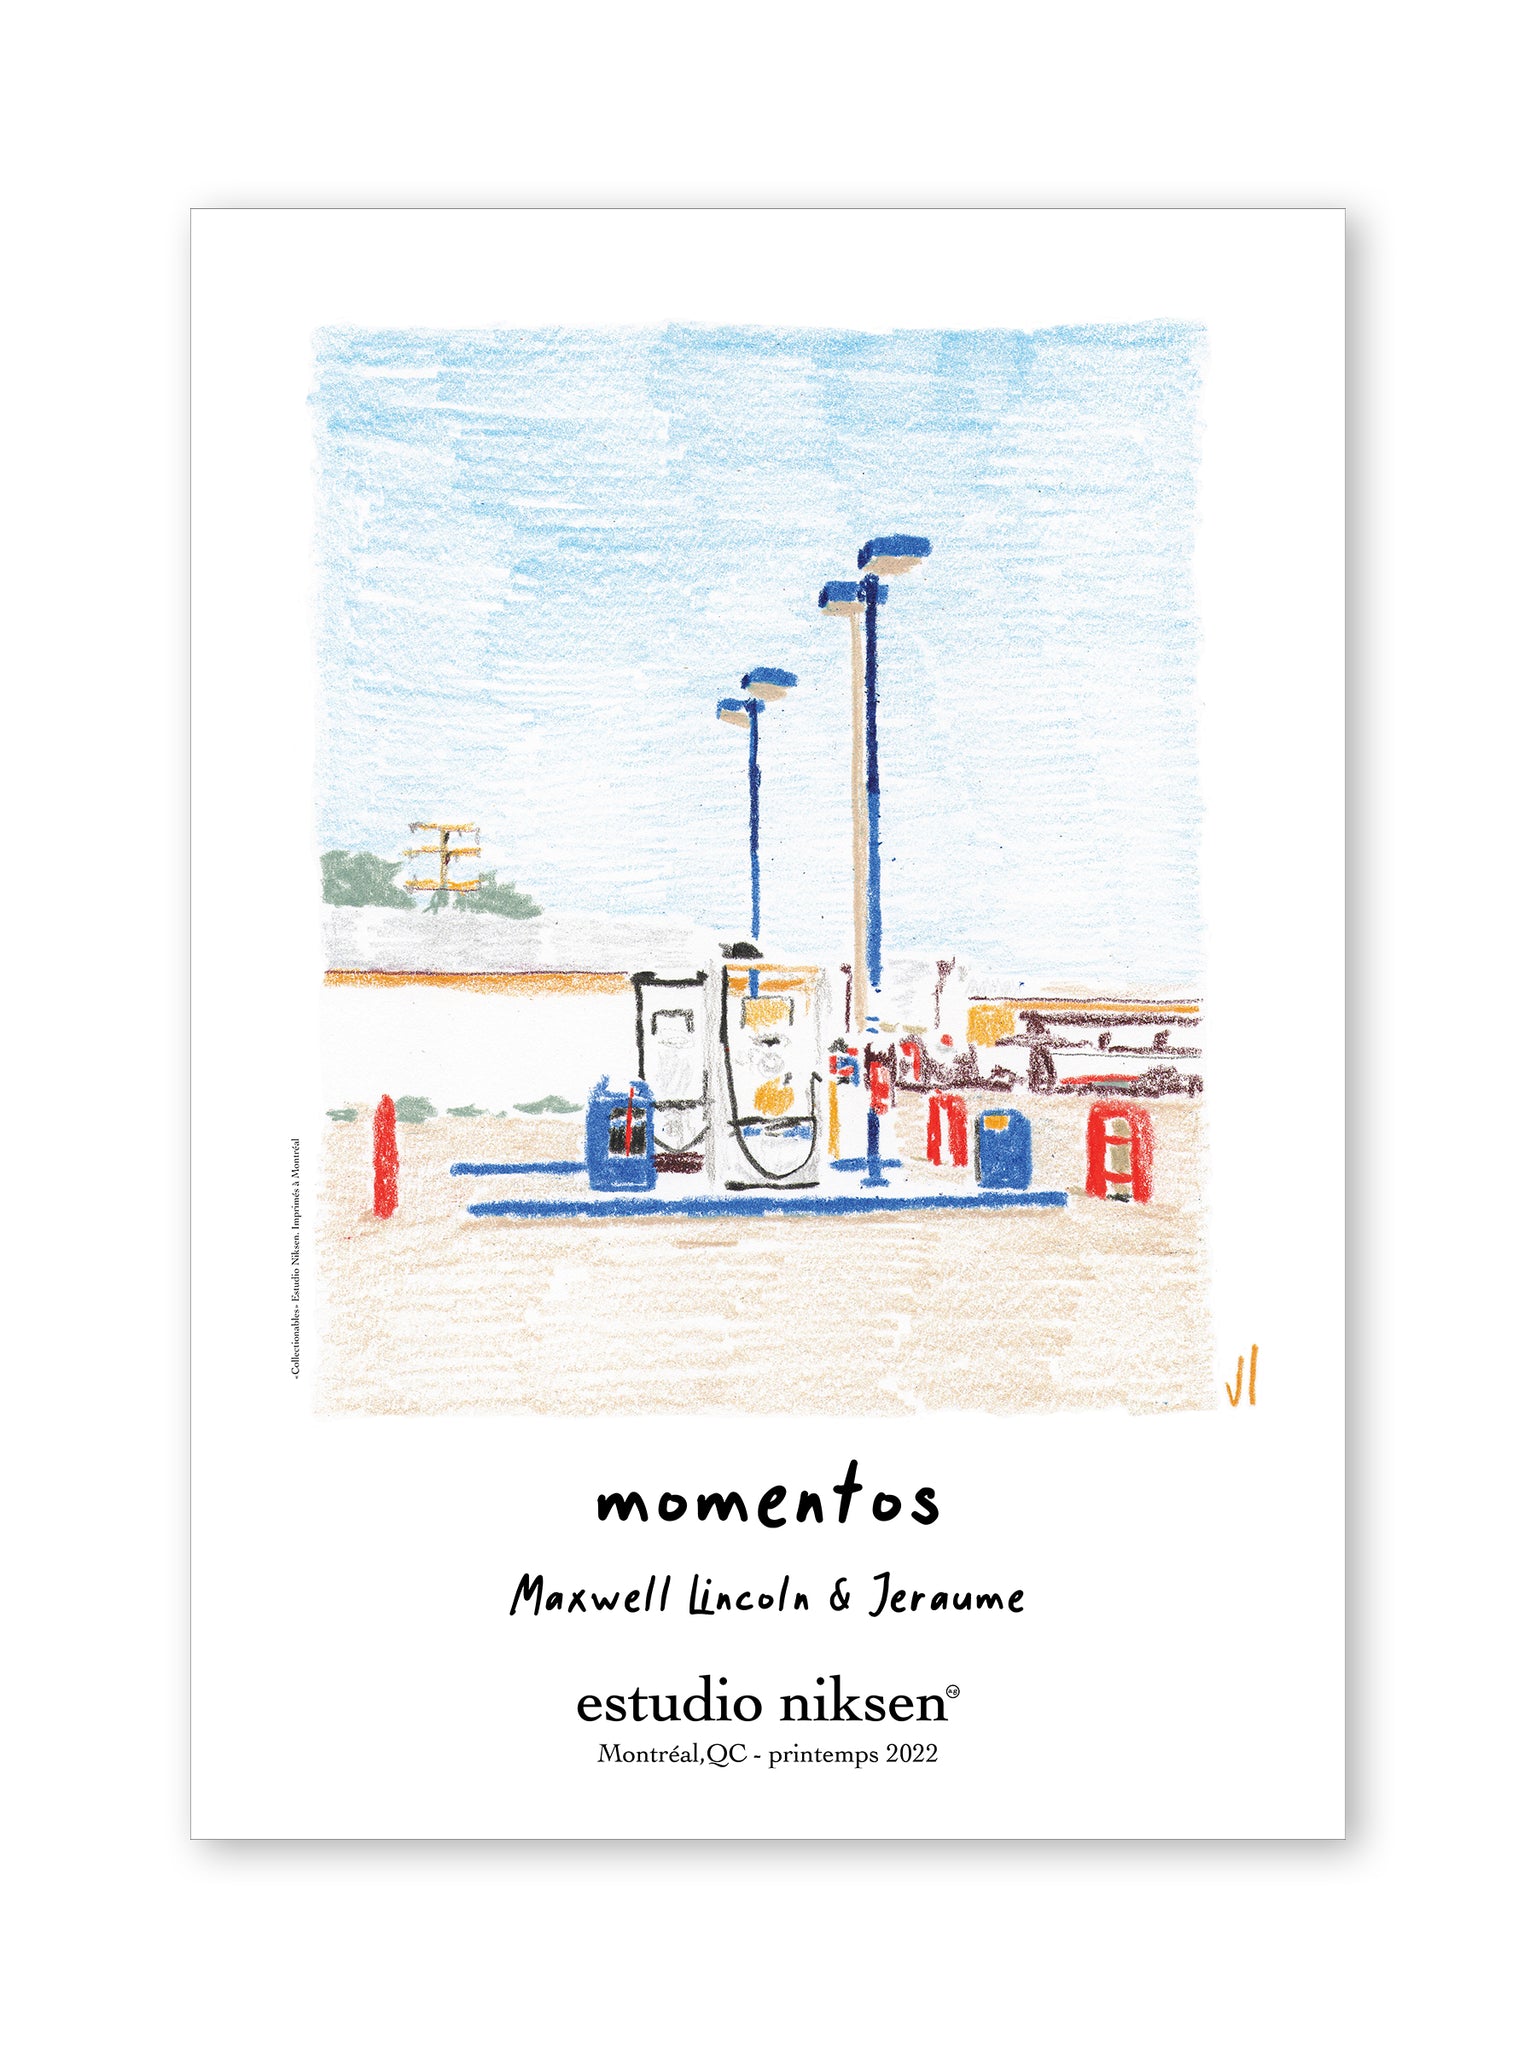 "Momentos" by Jeraume & Maxwell Lincoln